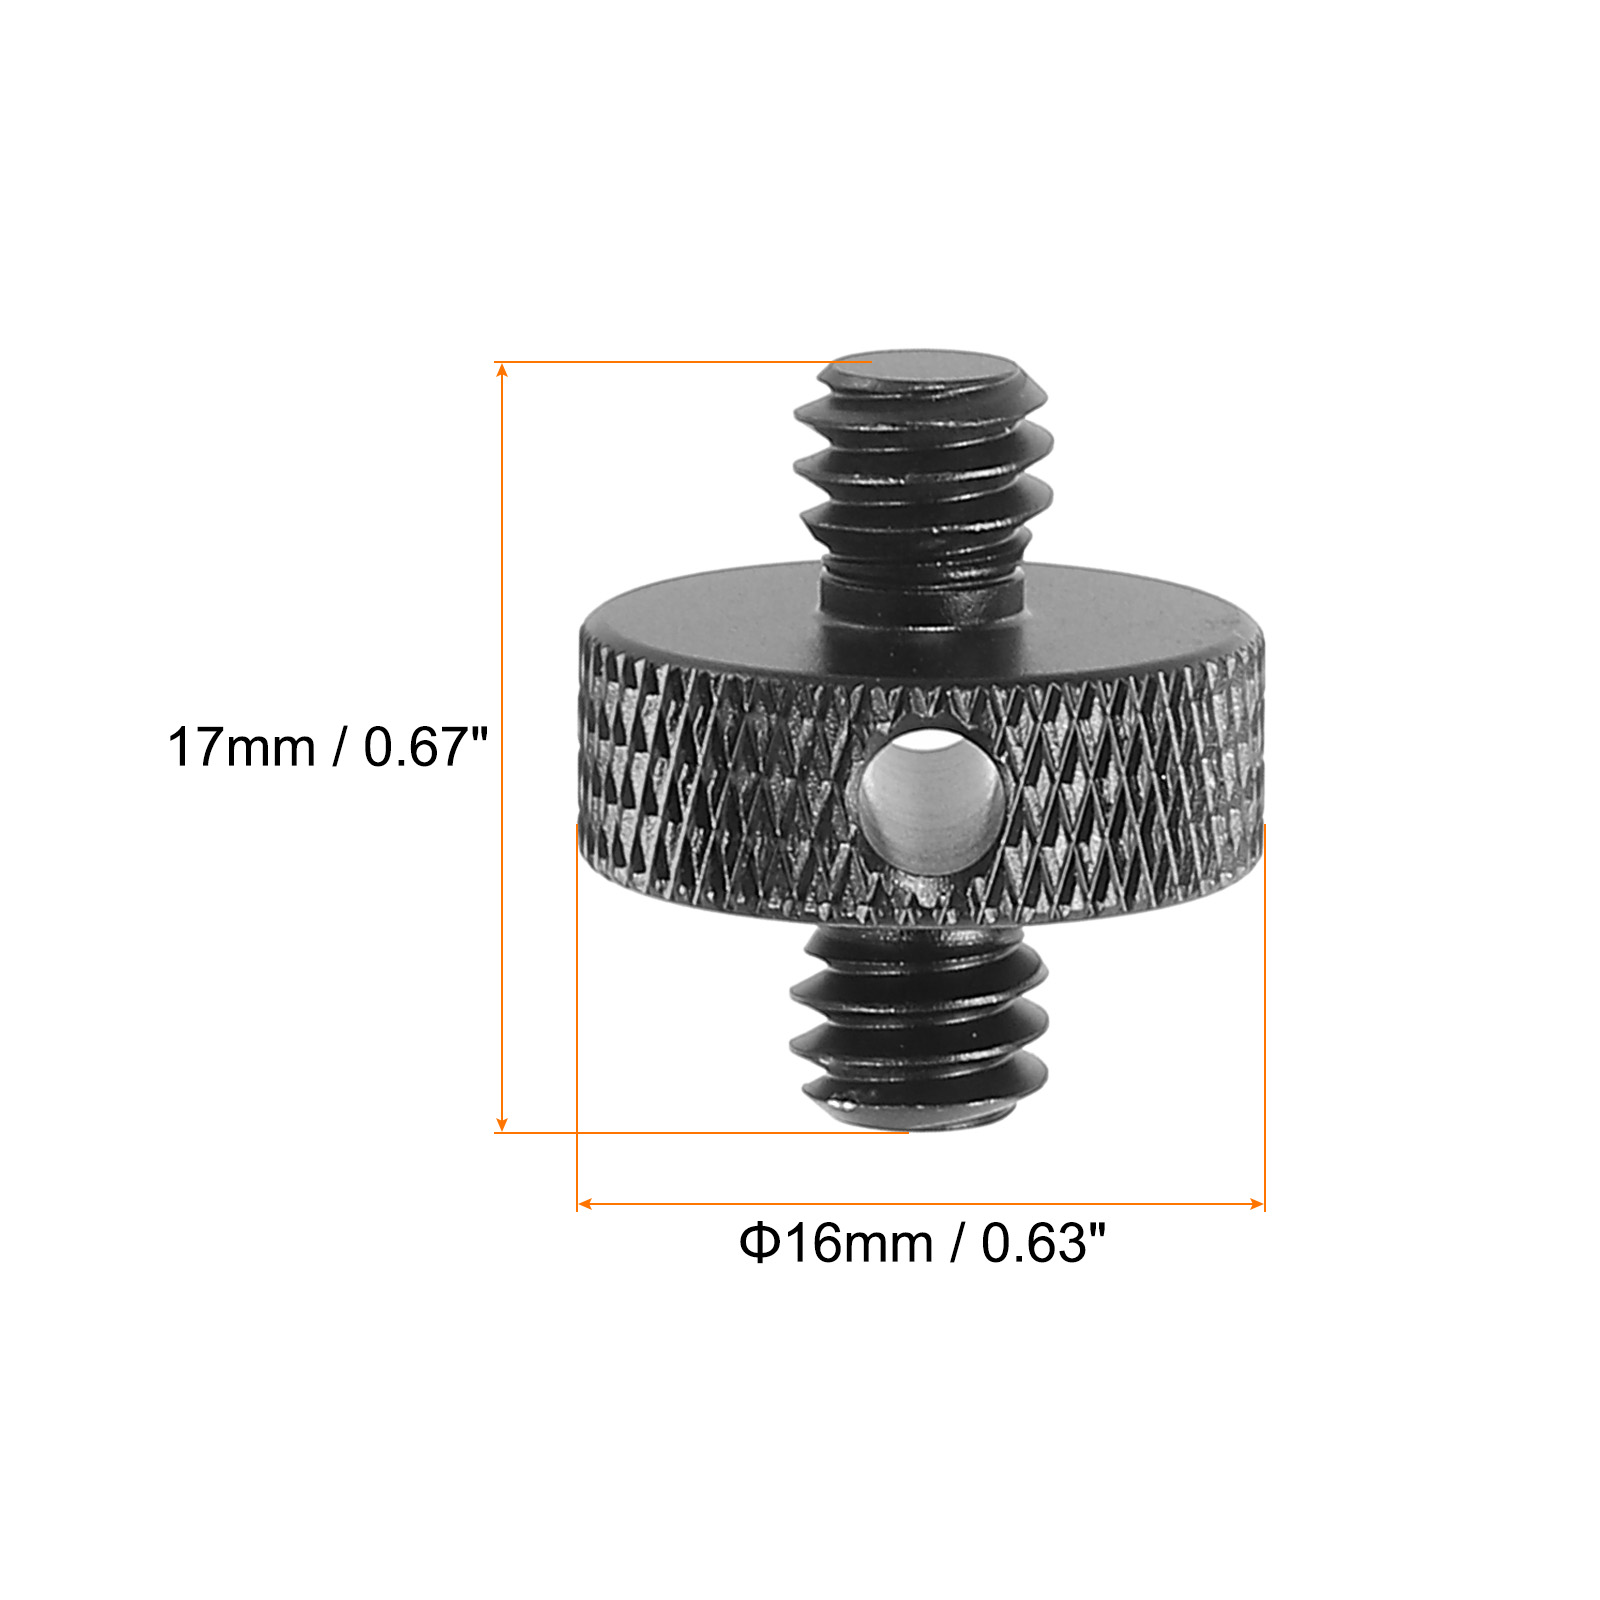 Uxcell Mic Stand Adapter 1/4 Male to 1/4 Male Thread Tripod Screw with Hole Double Sides Camera Screw Black 2 Pack - image 2 of 6